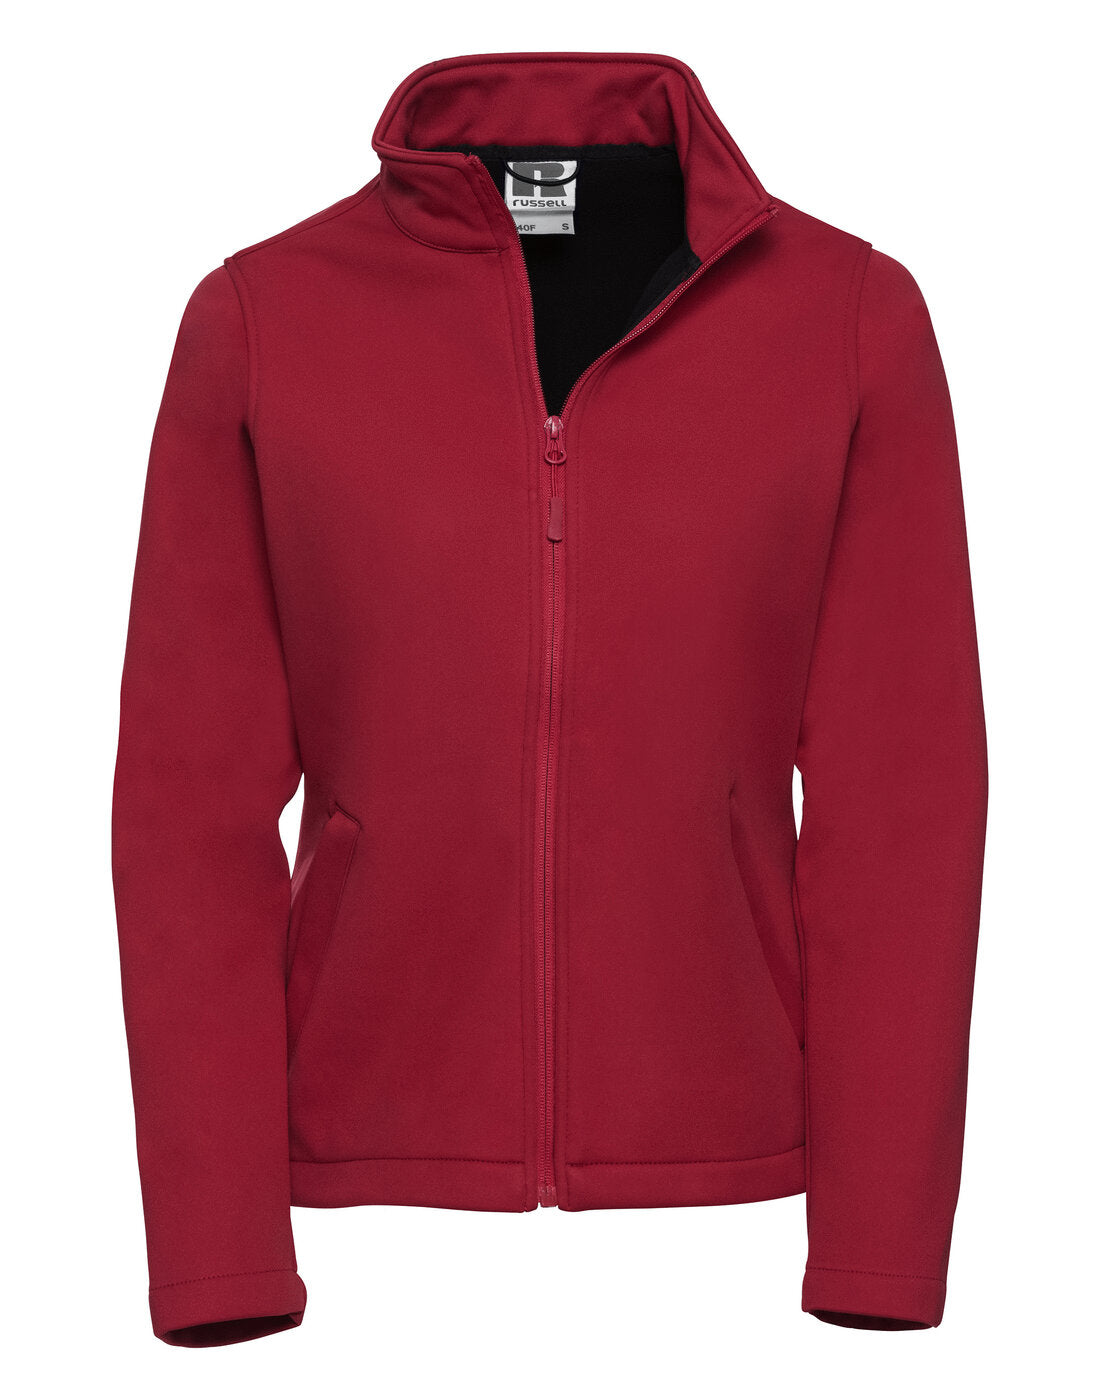 Russell Ladies Smart Softshell Jacket - Classic Red